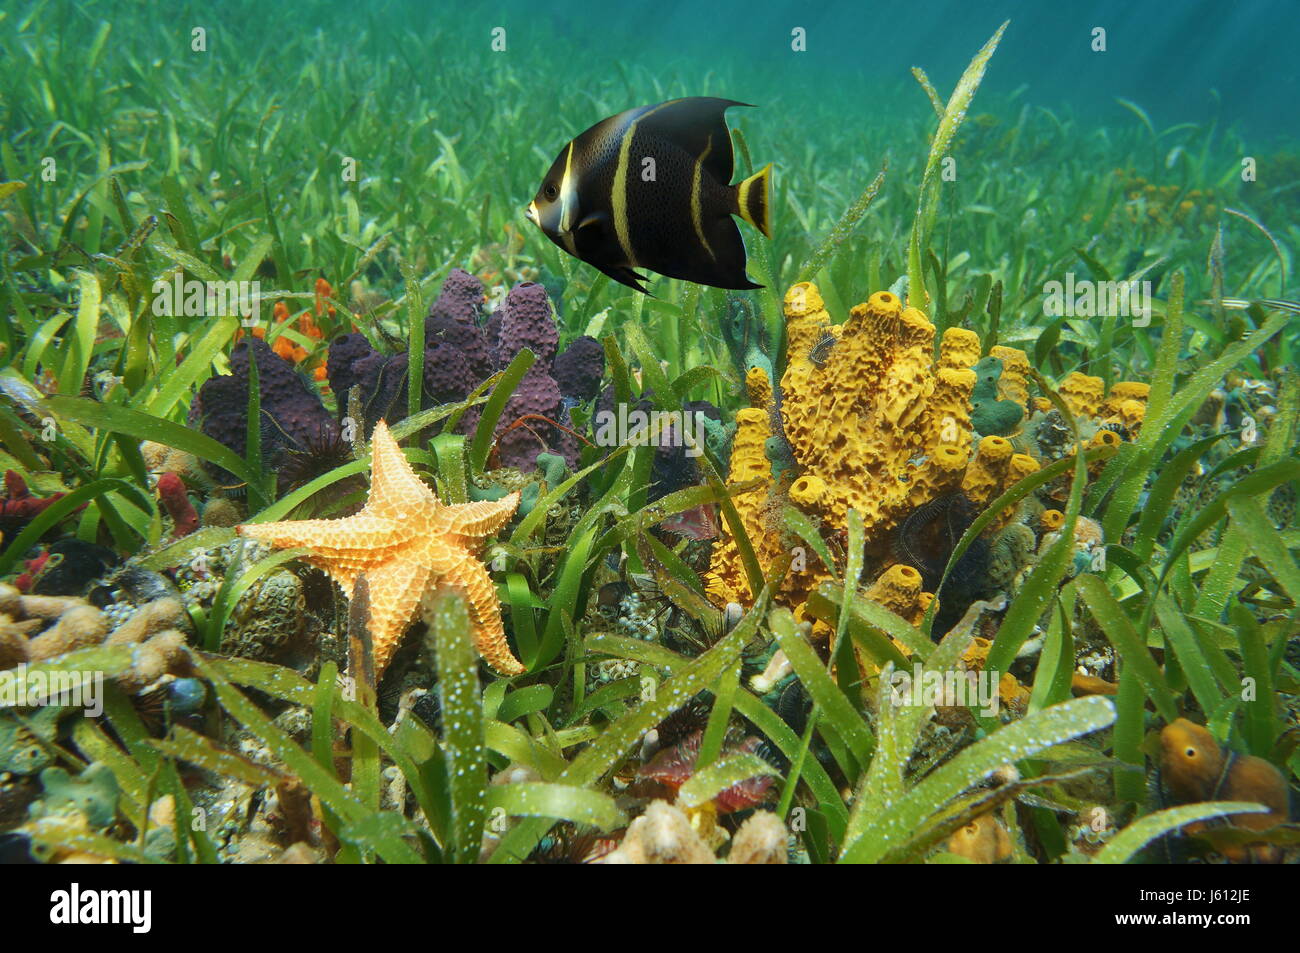 Colorful sea life underwater in the Caribbean sea on a grassy seabed with sponges, a starfish and a tropical fish angelfish Stock Photo